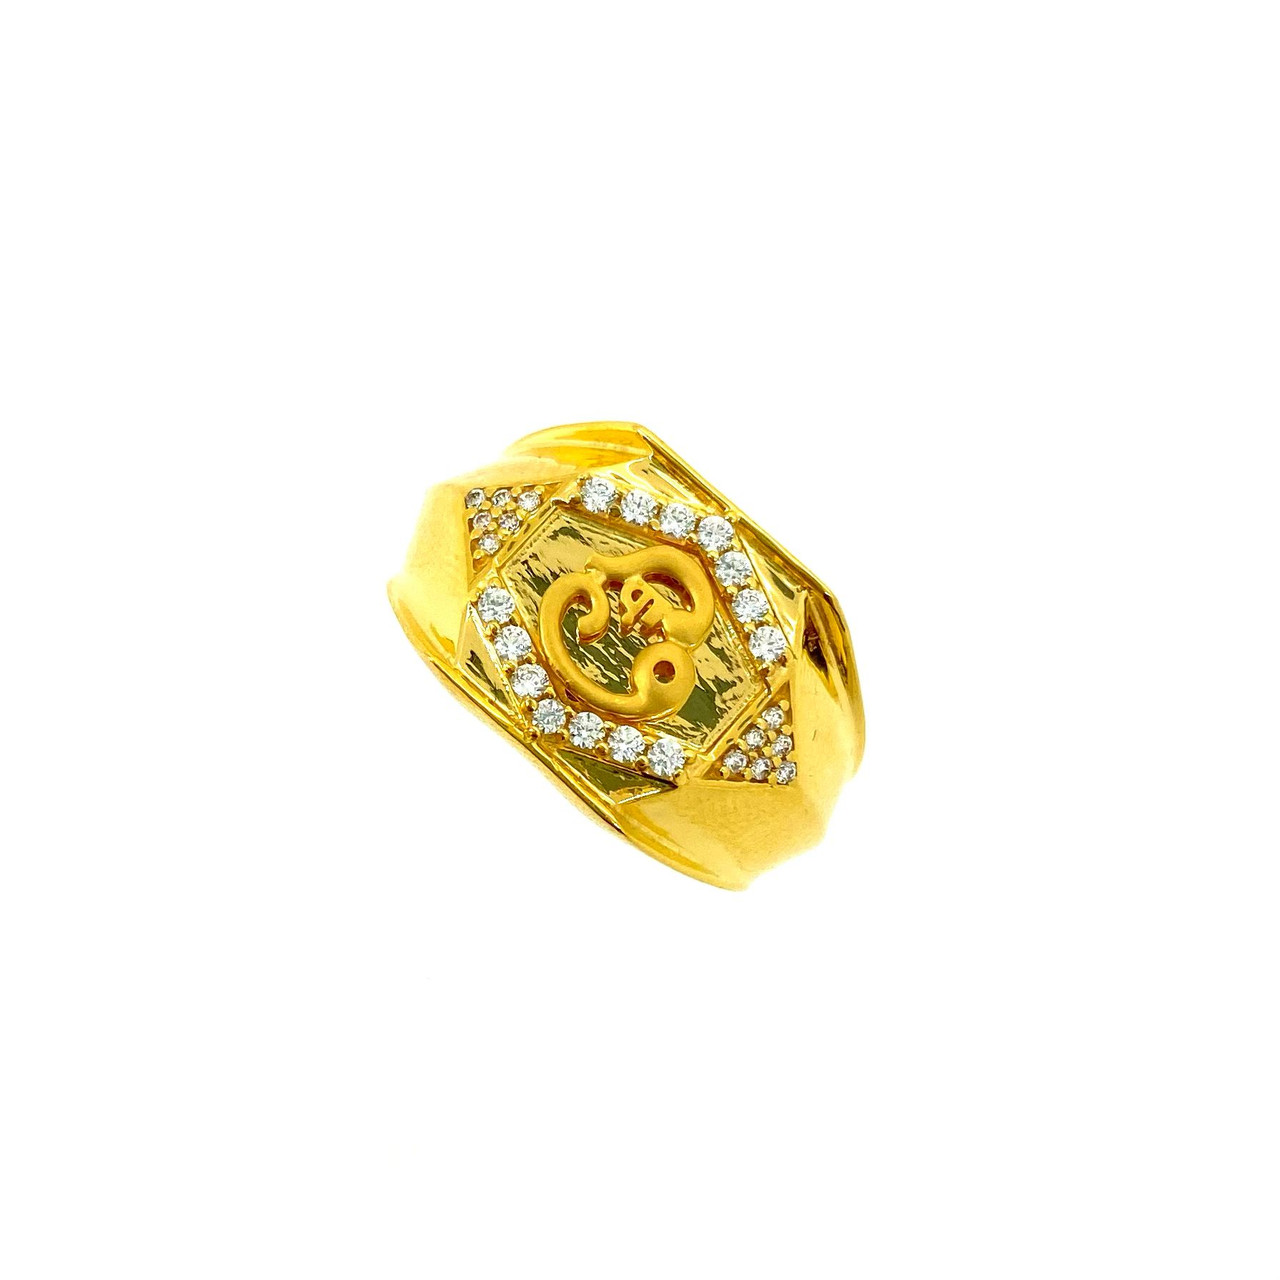 Ring 22ct gold ring with BIS 916 HALLMARK available for purchase via  8344247761 #goldring | Instagram